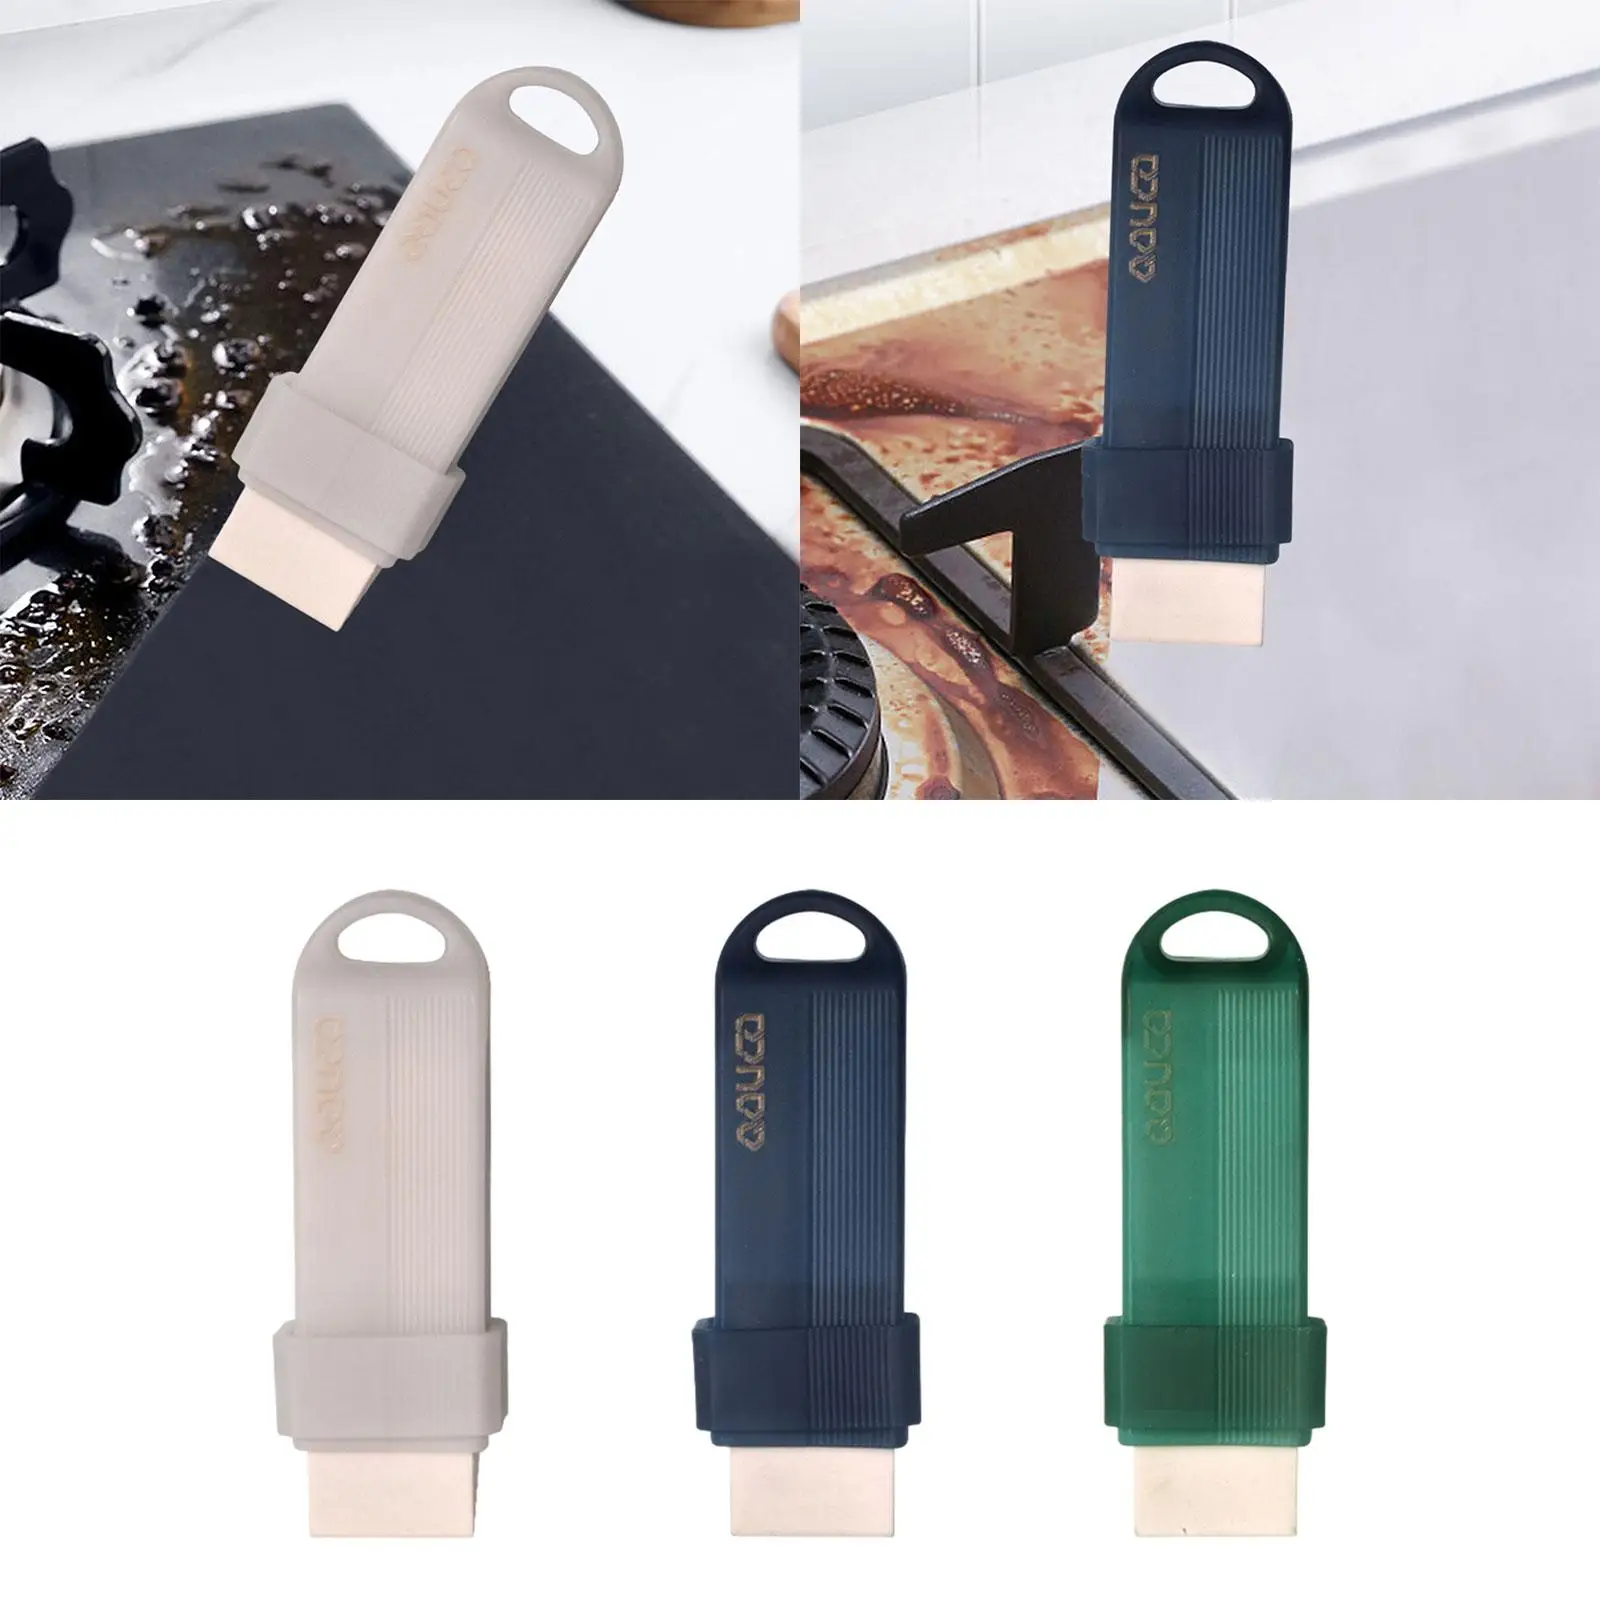 Cleaning Eraser Multi Functional Lightweight Space Saving Easy to Use Multi Surface Eraser for Dishes Shoes Bathtub Car Bathroom